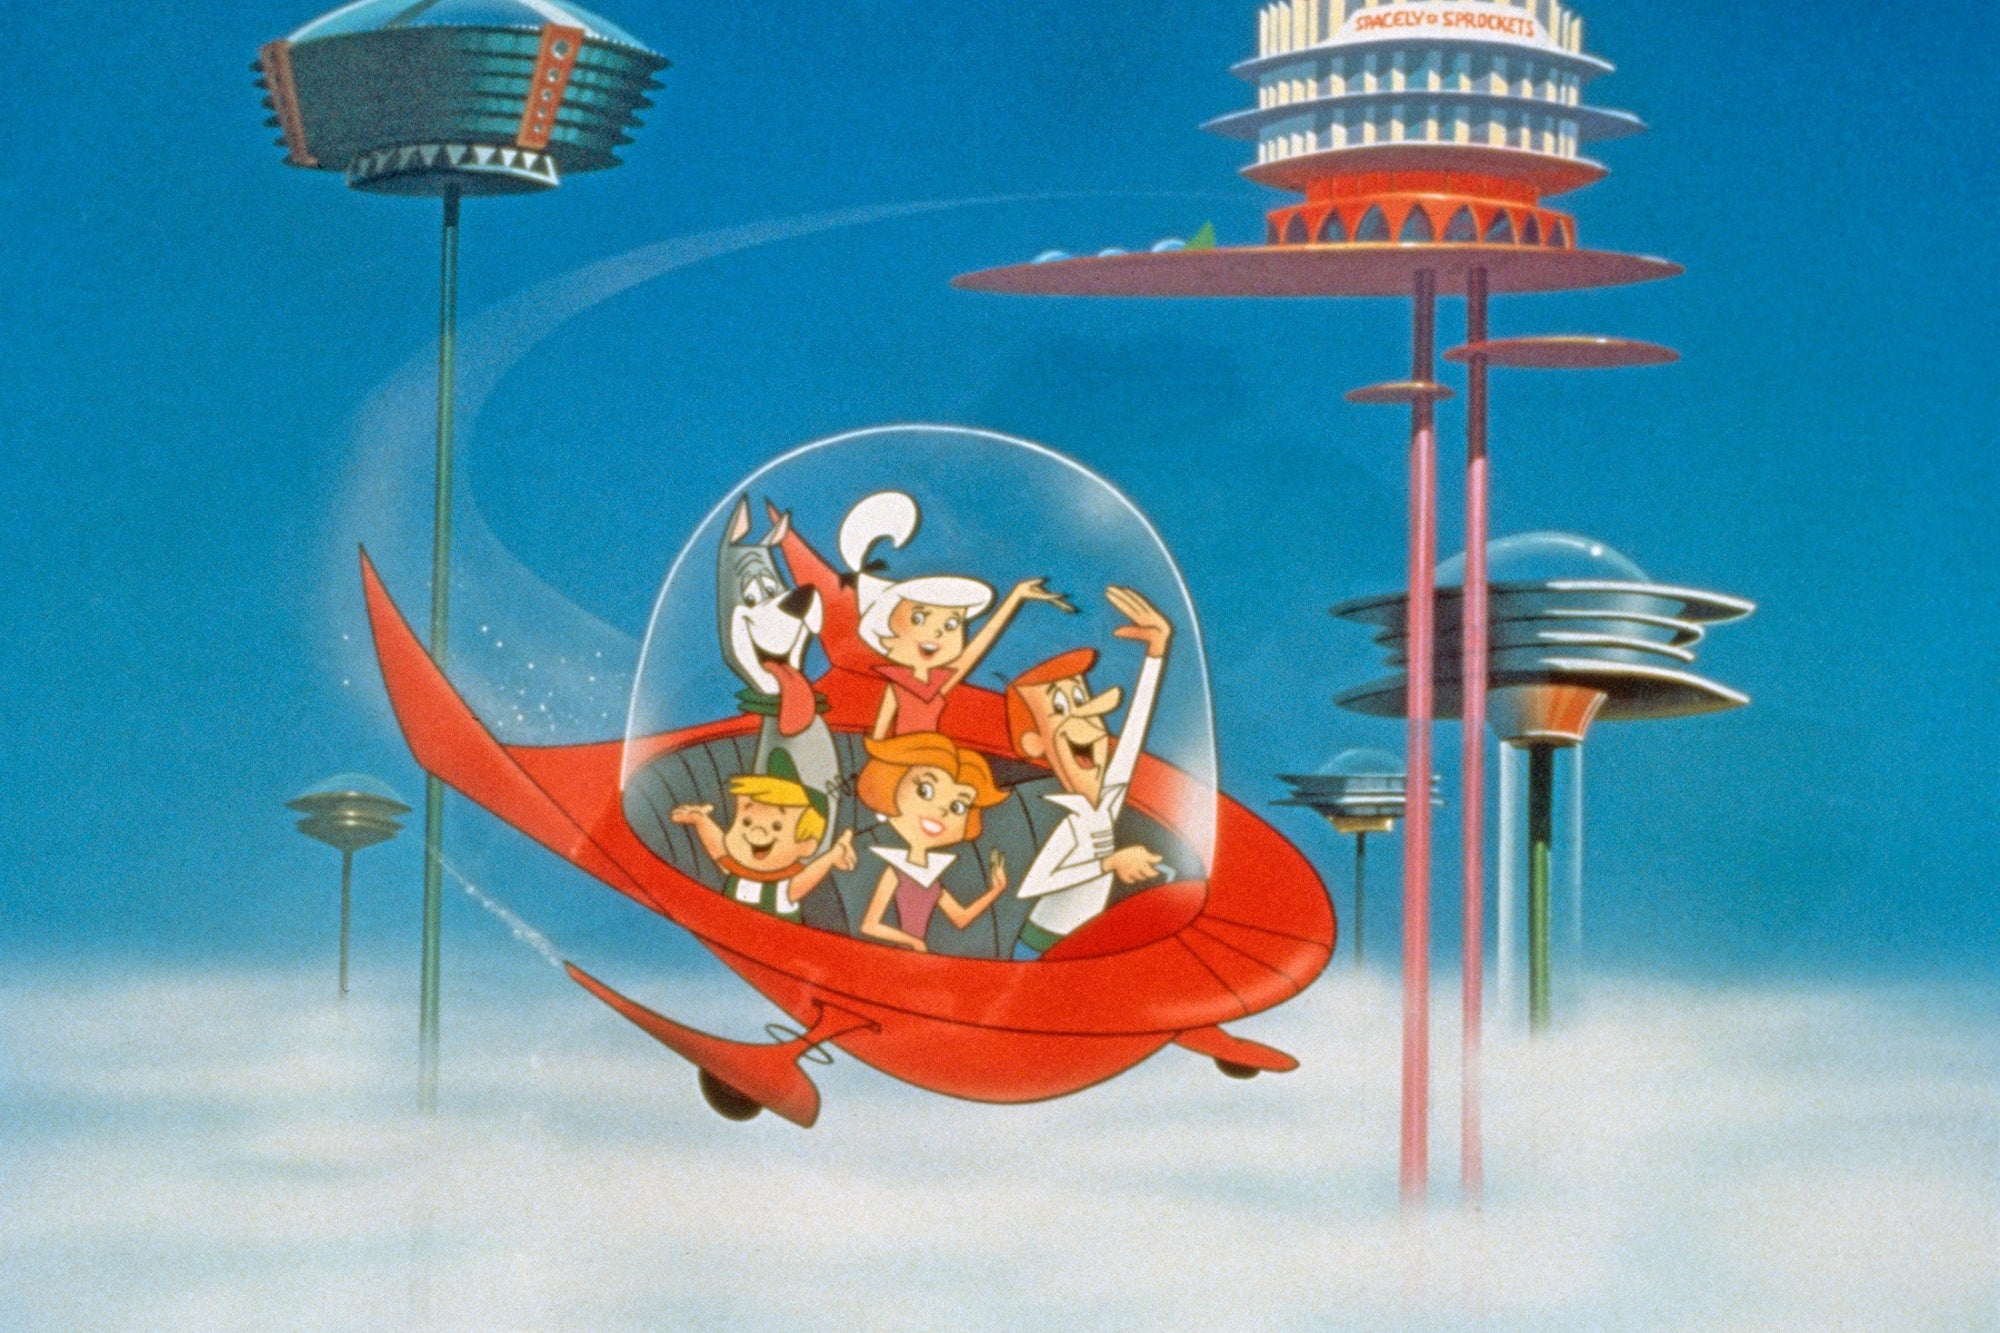 What Boards, CEOs and Enterprise Leaders Can Study From the Jetsons